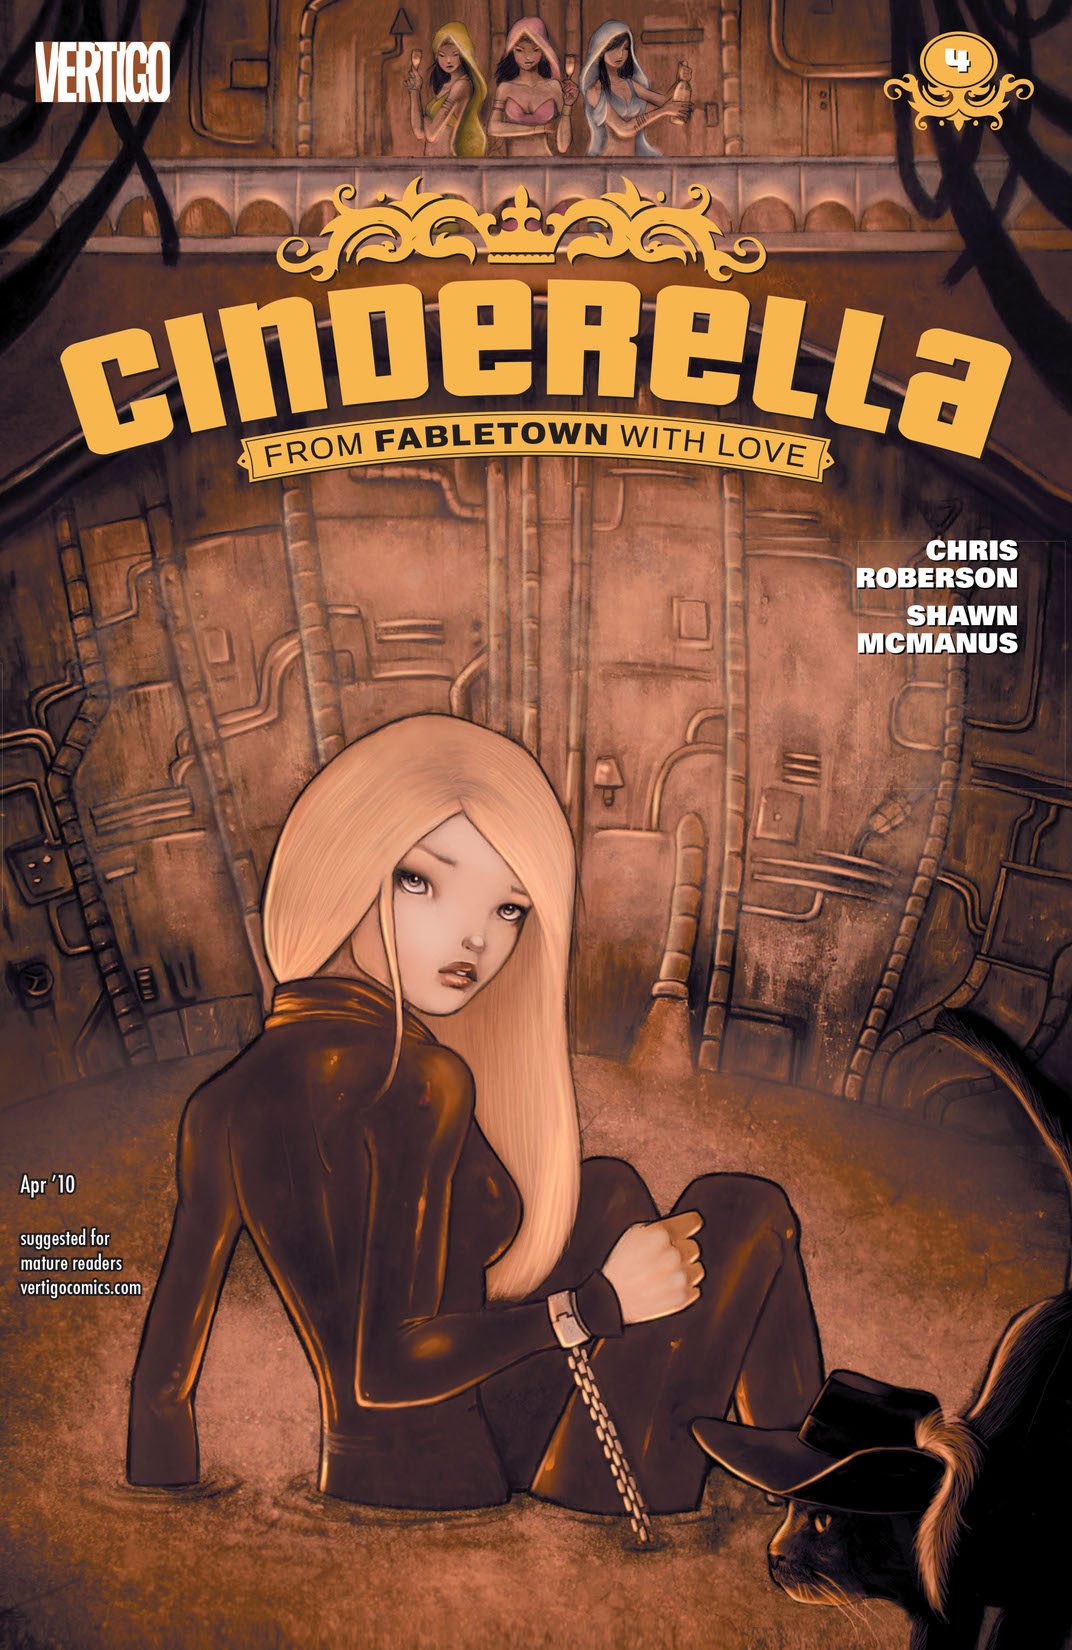 Cinderella: From Fabletown with Love #4 preview images